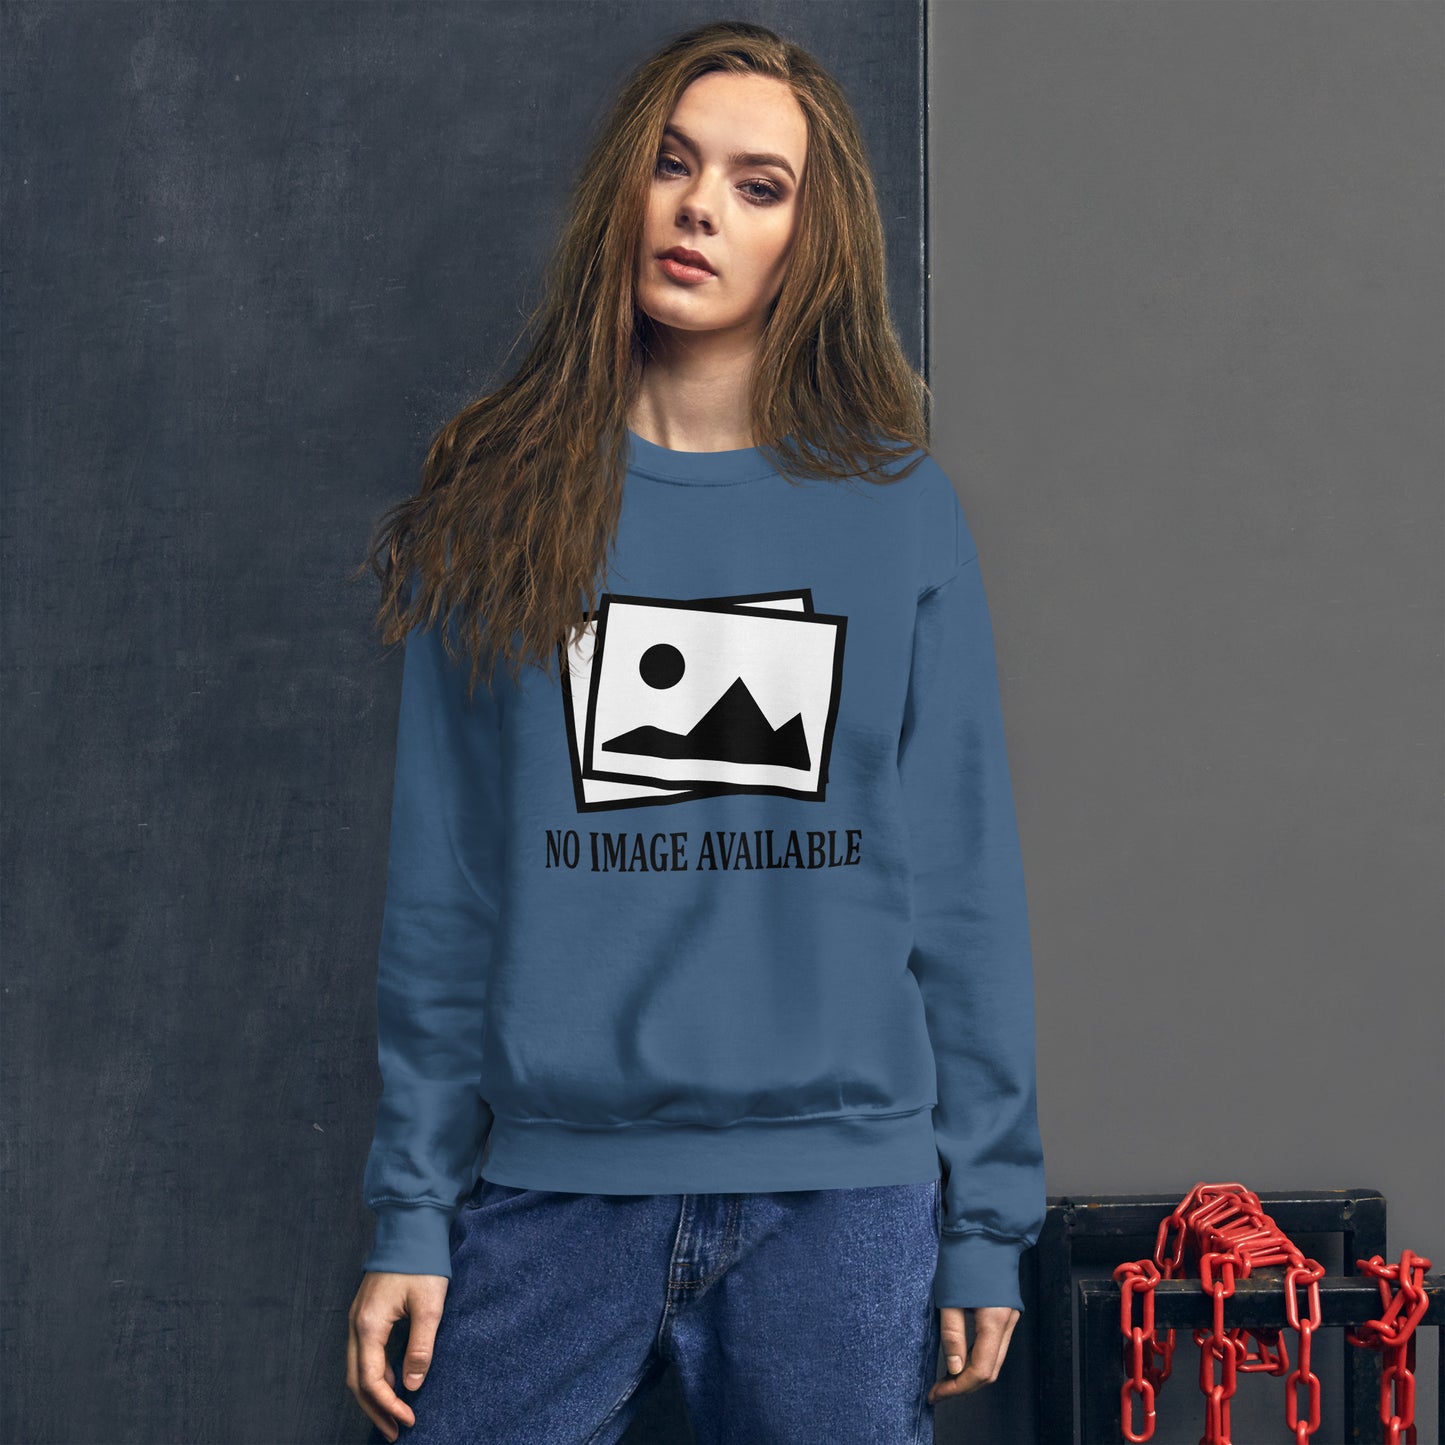 Women with indigo blue sweatshirt with image and text "no image available"